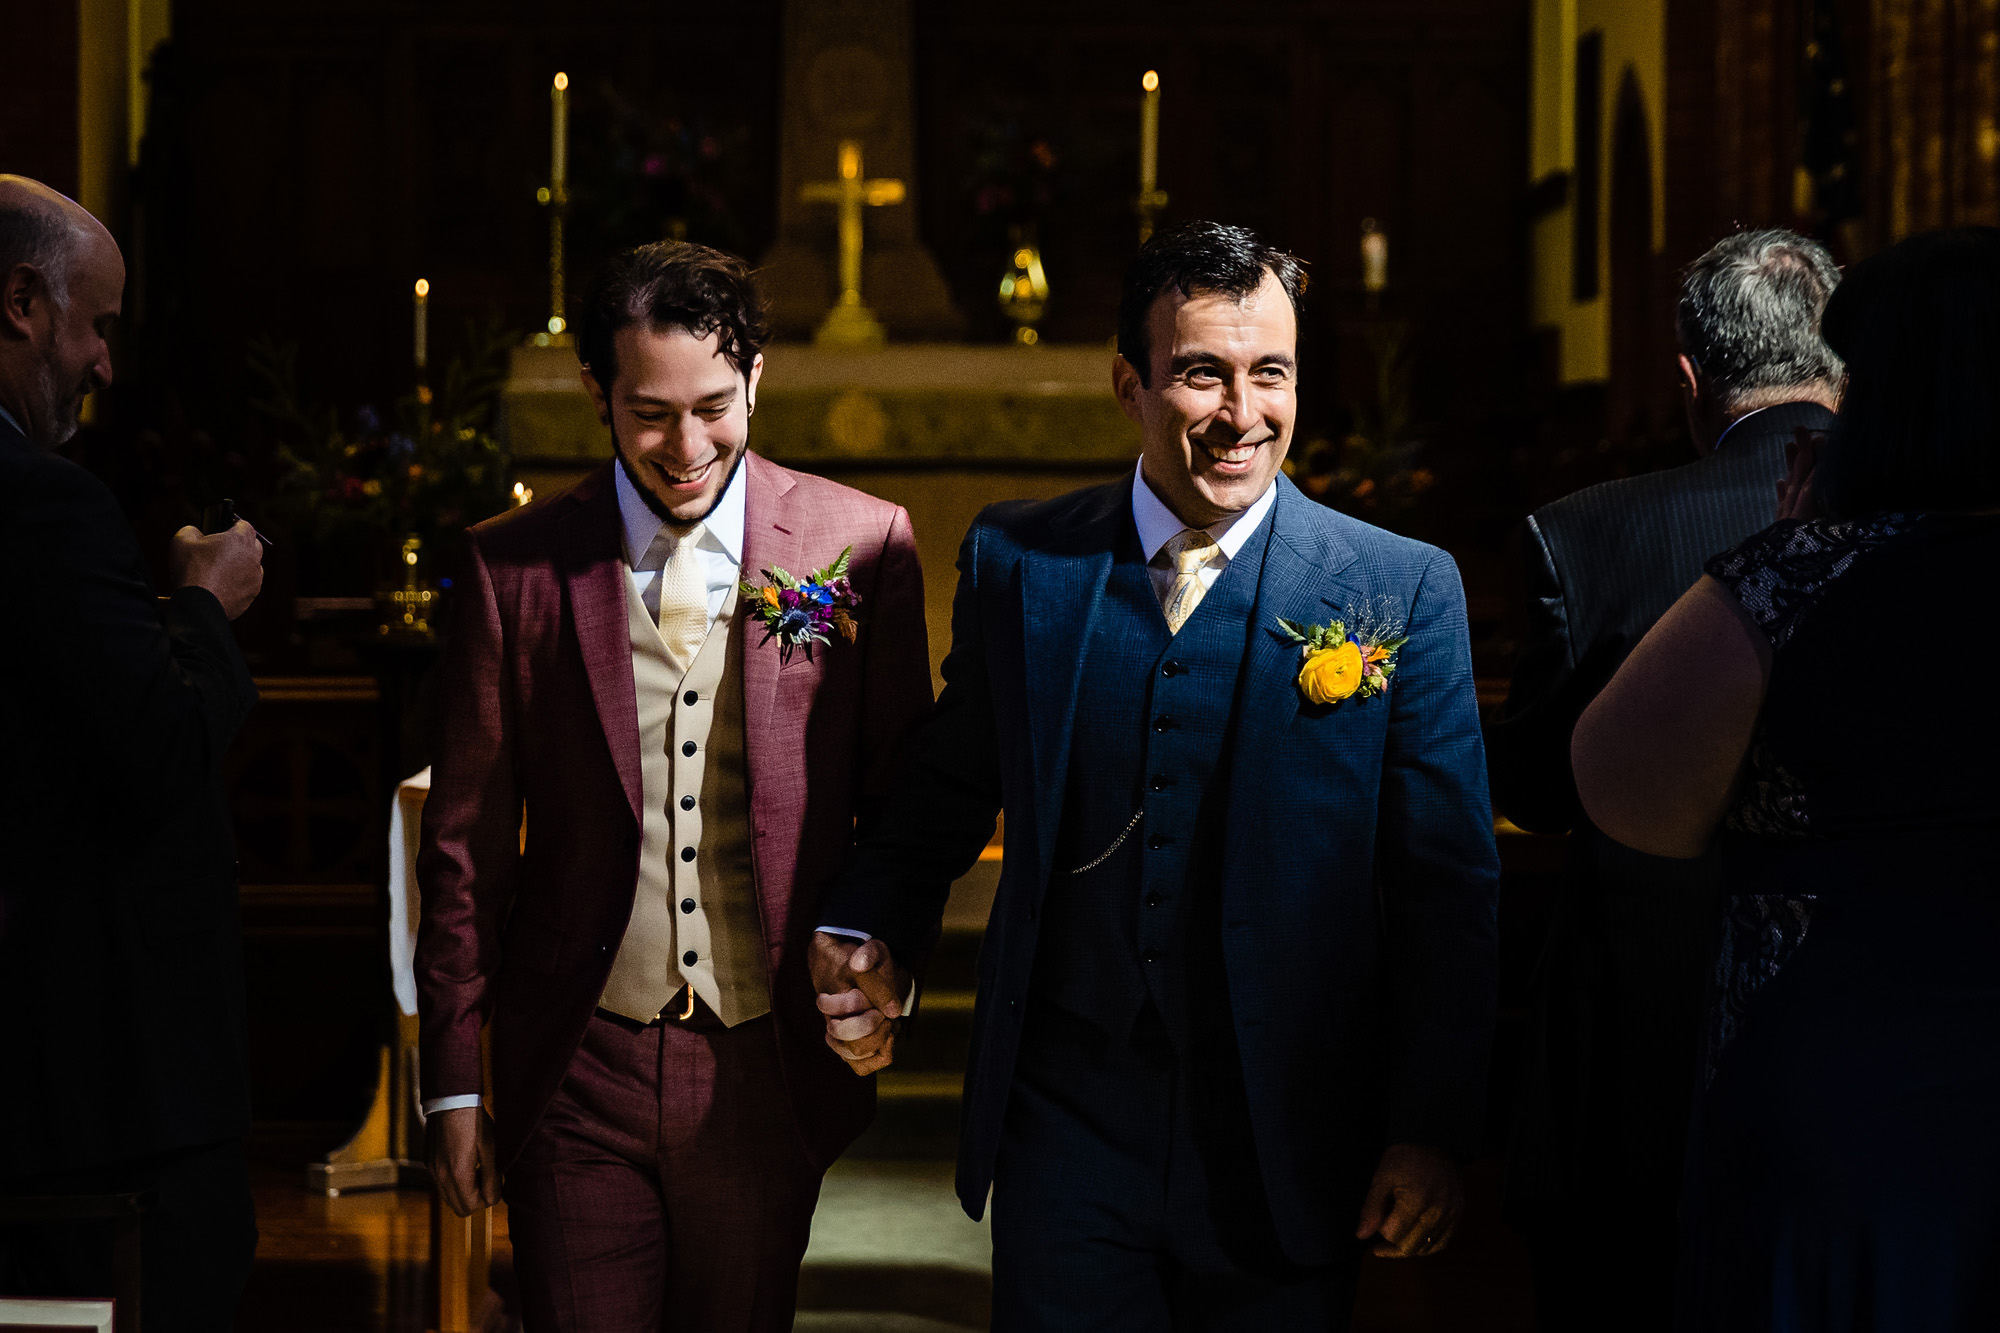 Two grooms walk down the aisle after their ceremony in a chapel.